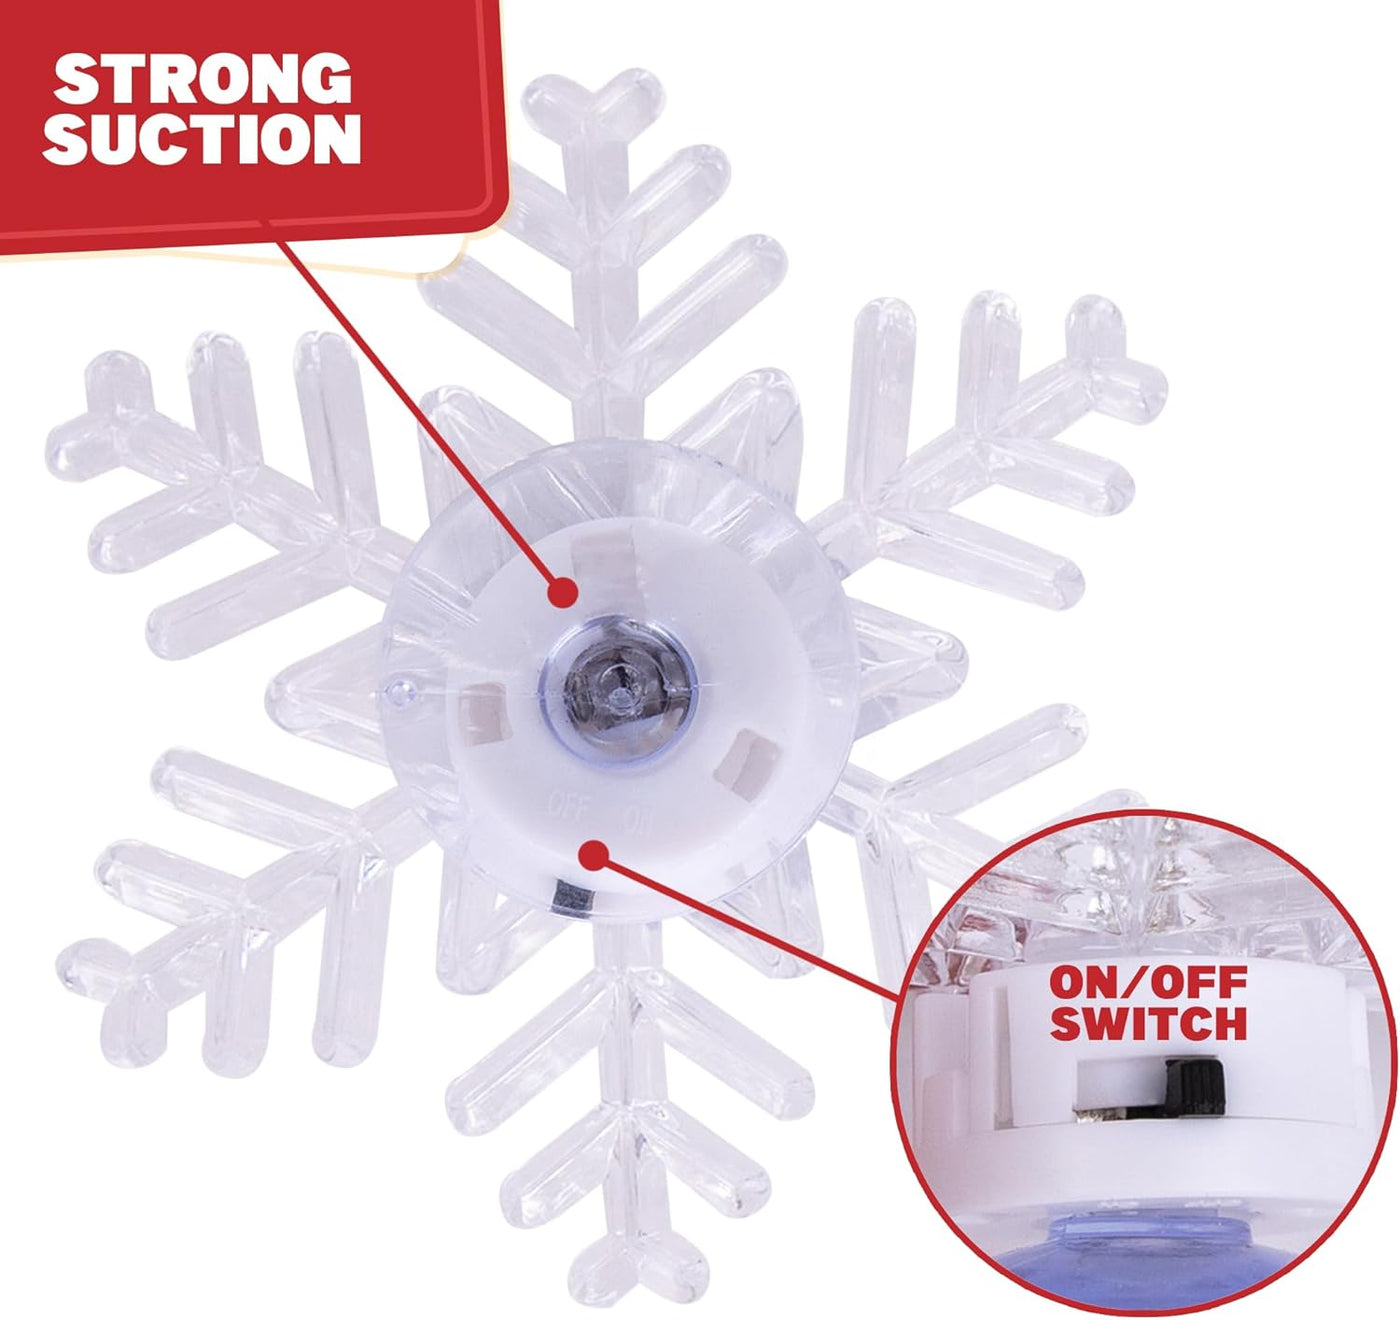 Suction Cup Window Lights for Christmas - Set of 3 Stick on Christmas Lights - Snowflake Window Light Decorations That Light Up in Green, Blue, Purple, and Red